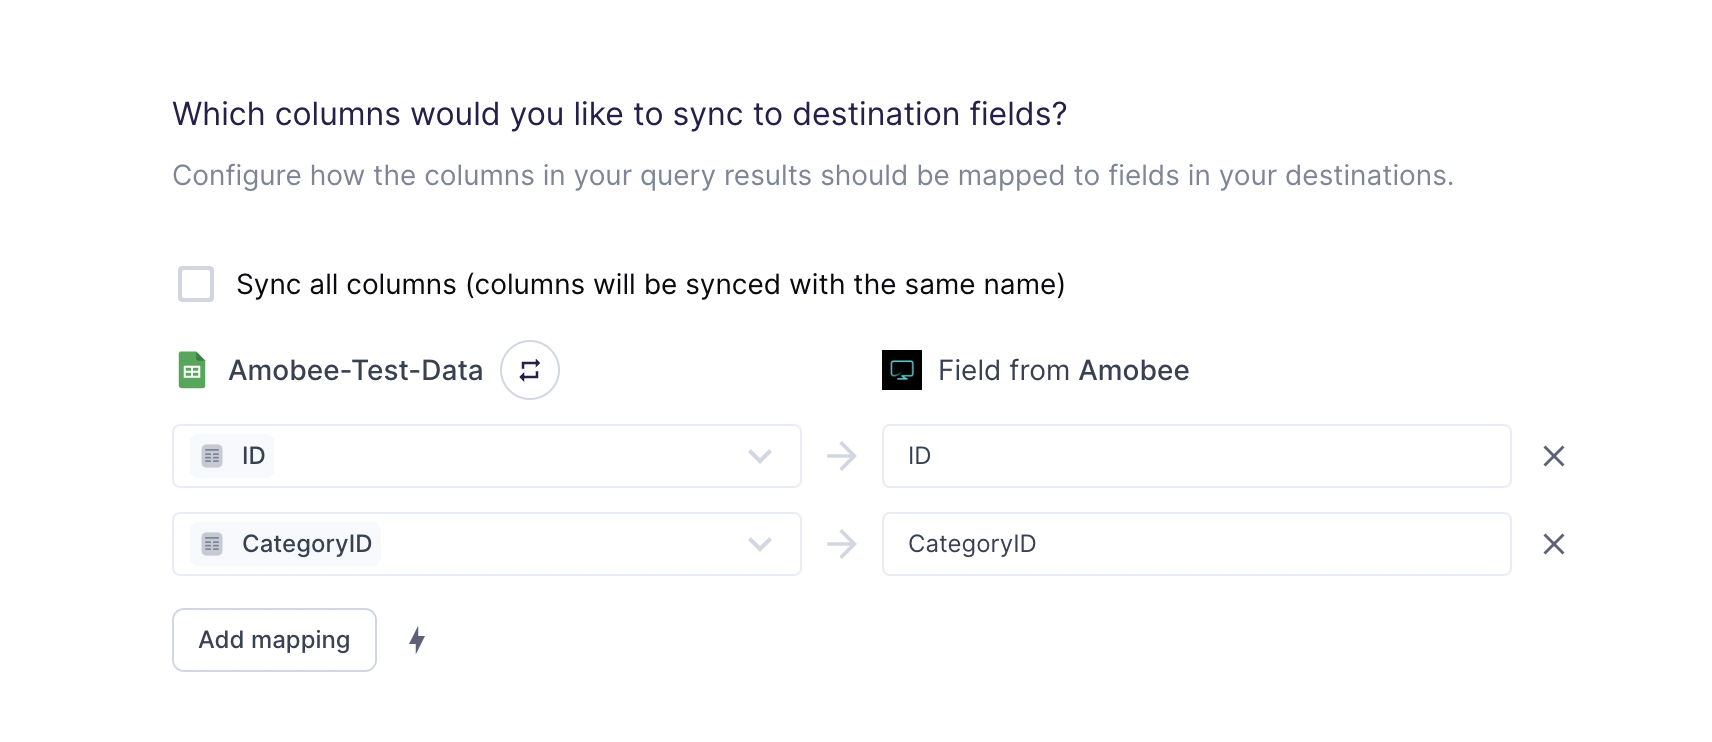 Mapping ID and Category ID fields